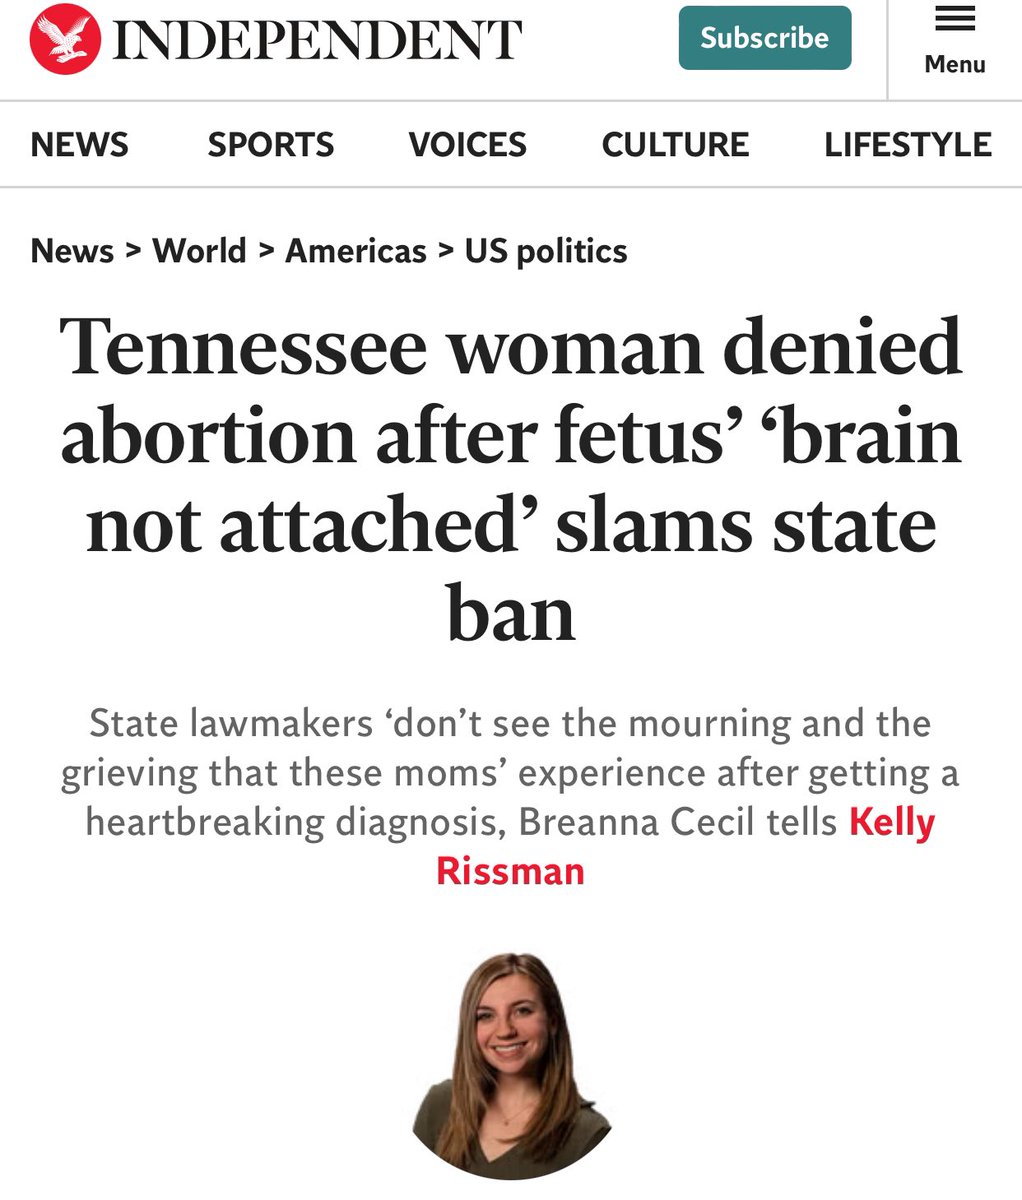 “The state of Tennessee took my fertility from me.” TN woman denied an abortion despite a fatal abnormality says TN anti-abortion laws resulted in her losing an ovary, a fallopian tube — and her hopes for a large family. (cc: @GovBillLee @TNGOP) independent.co.uk/news/world/ame…